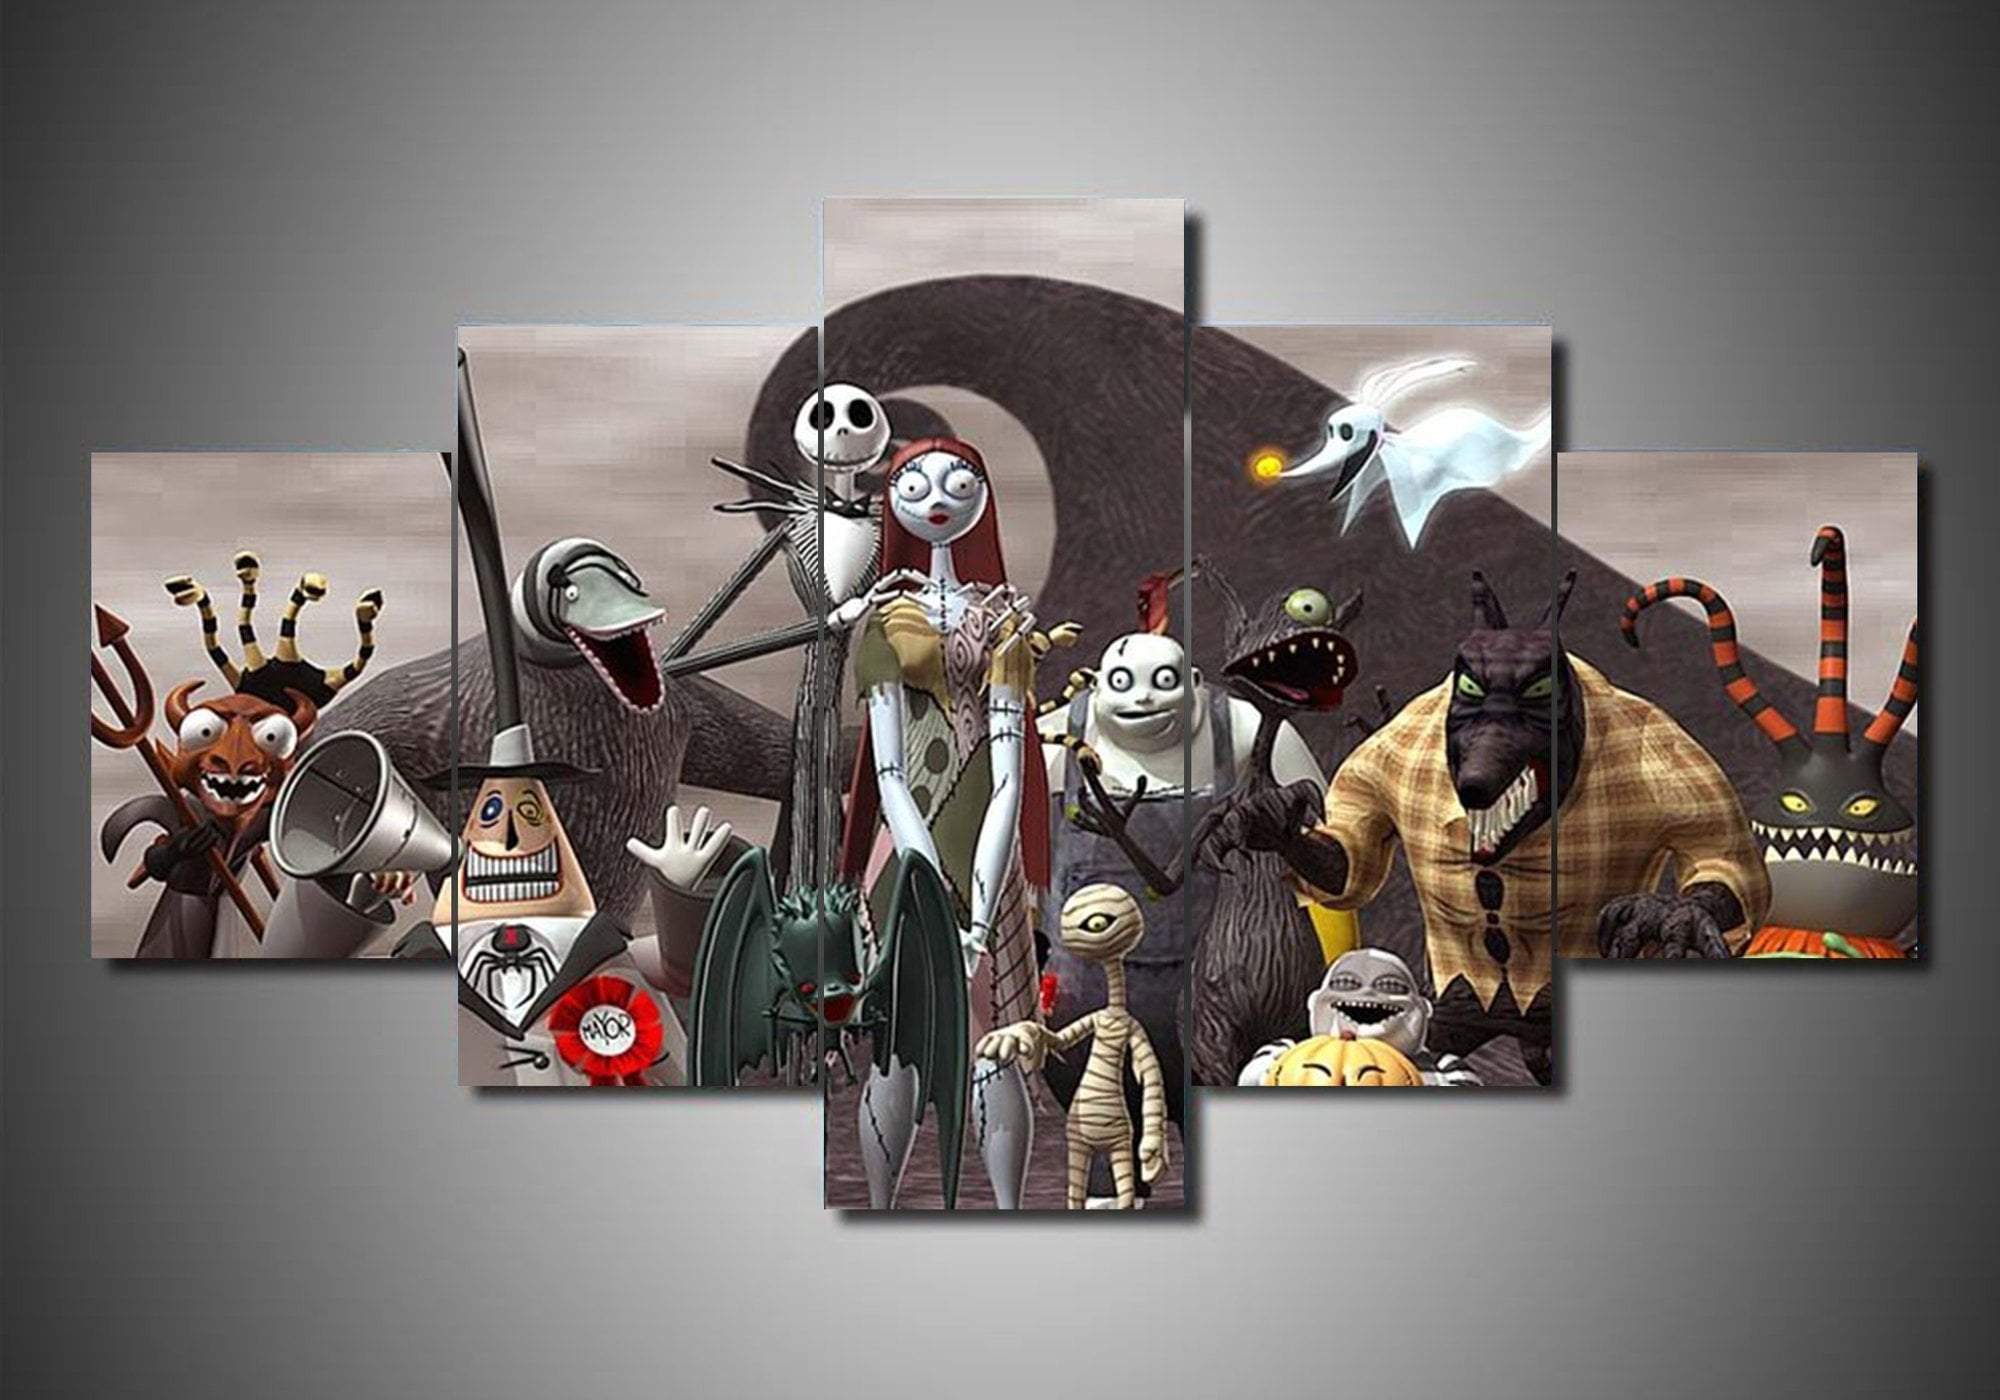 Creatice Nightmare Before Christmas Wall Decor for Large Space